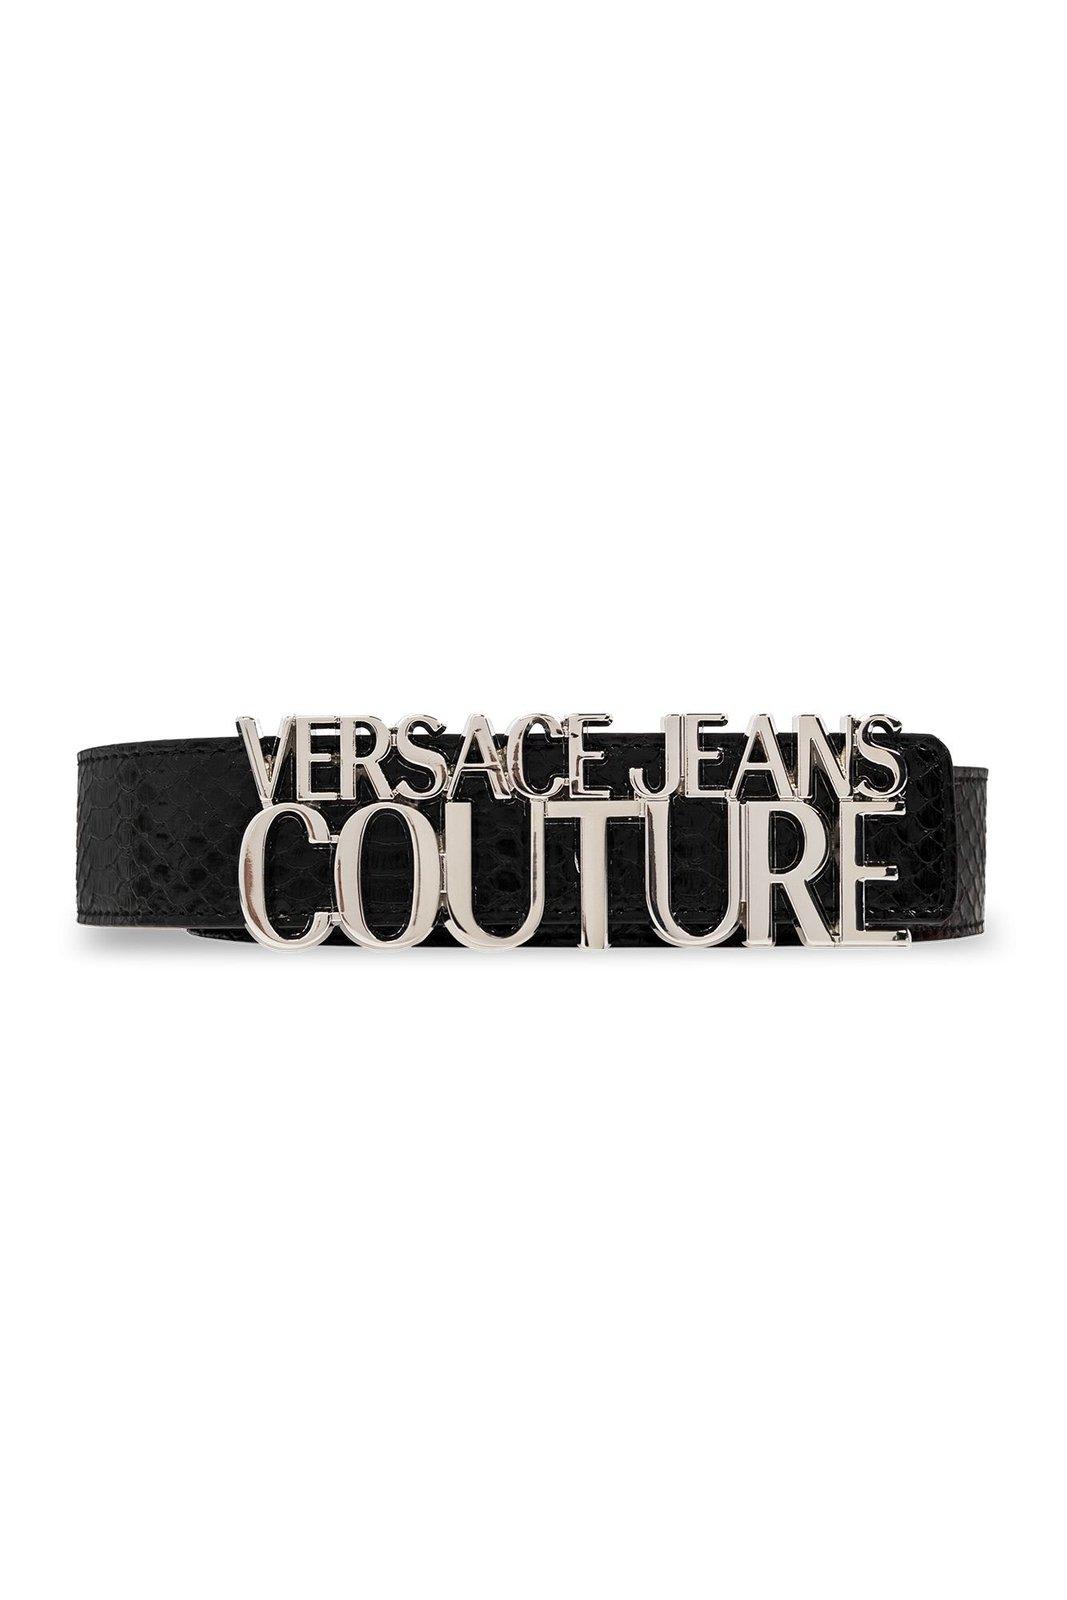 Versace Jeans Couture Logo Lettering Buckle Belt In Black